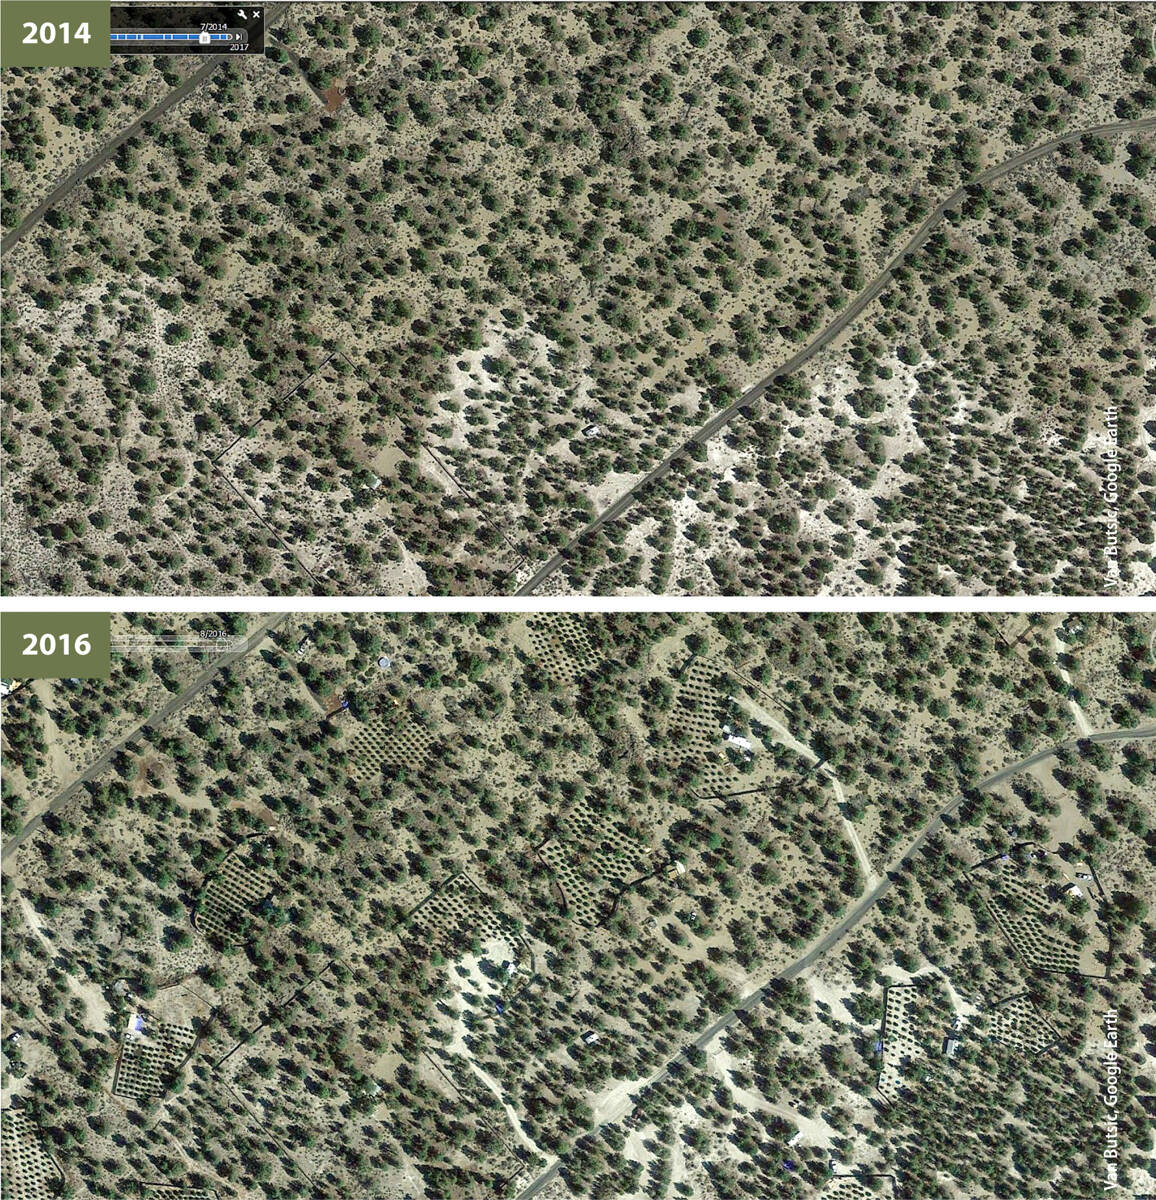 Images from Google Earth show the establishment of new cannabis cultivation sites between 2014 and 2016 at a Siskiyou County subdivision. Images courtesy of Dr. Van Butsic.